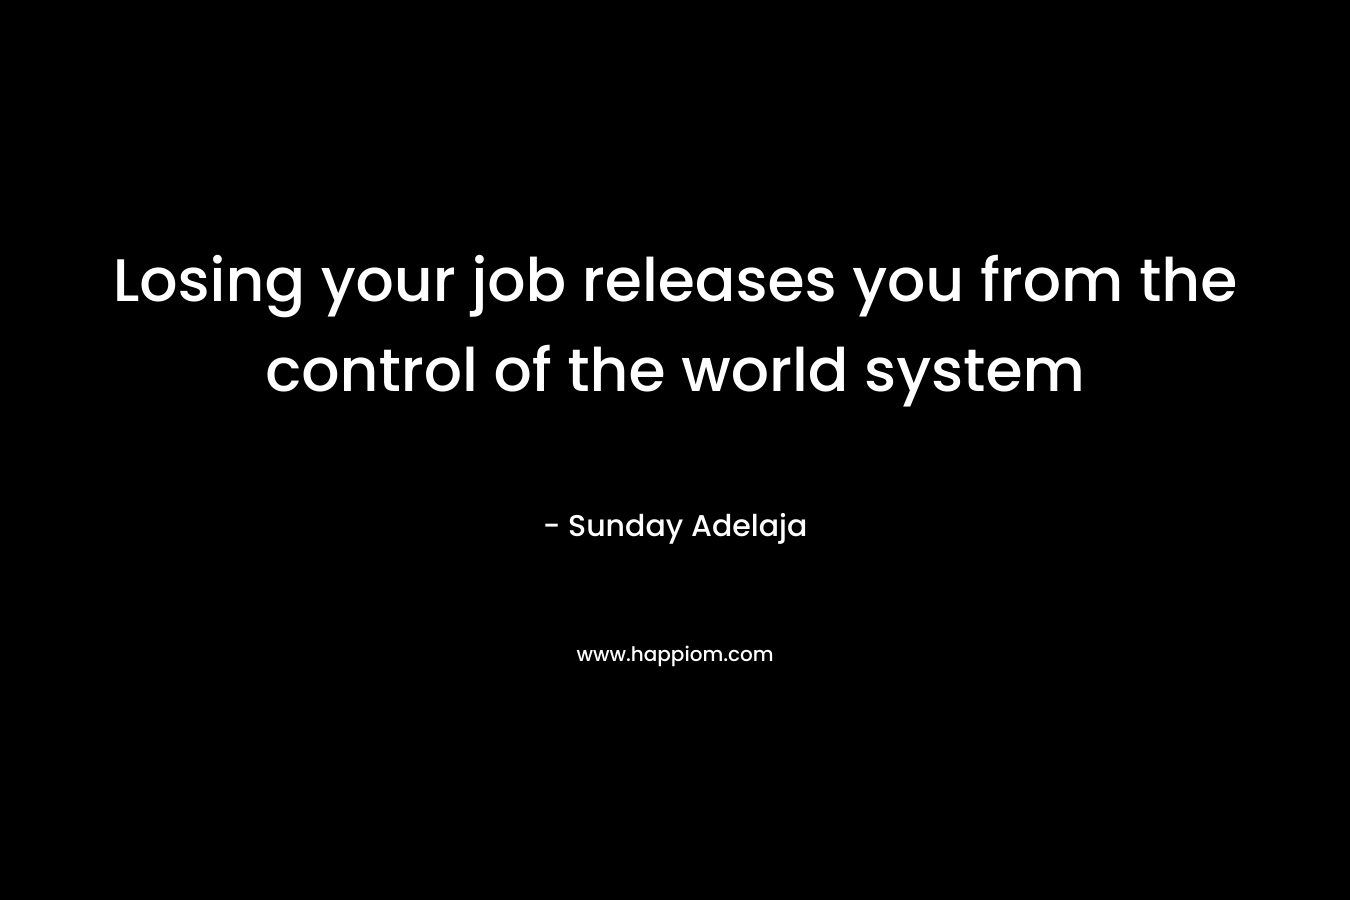 Losing your job releases you from the control of the world system